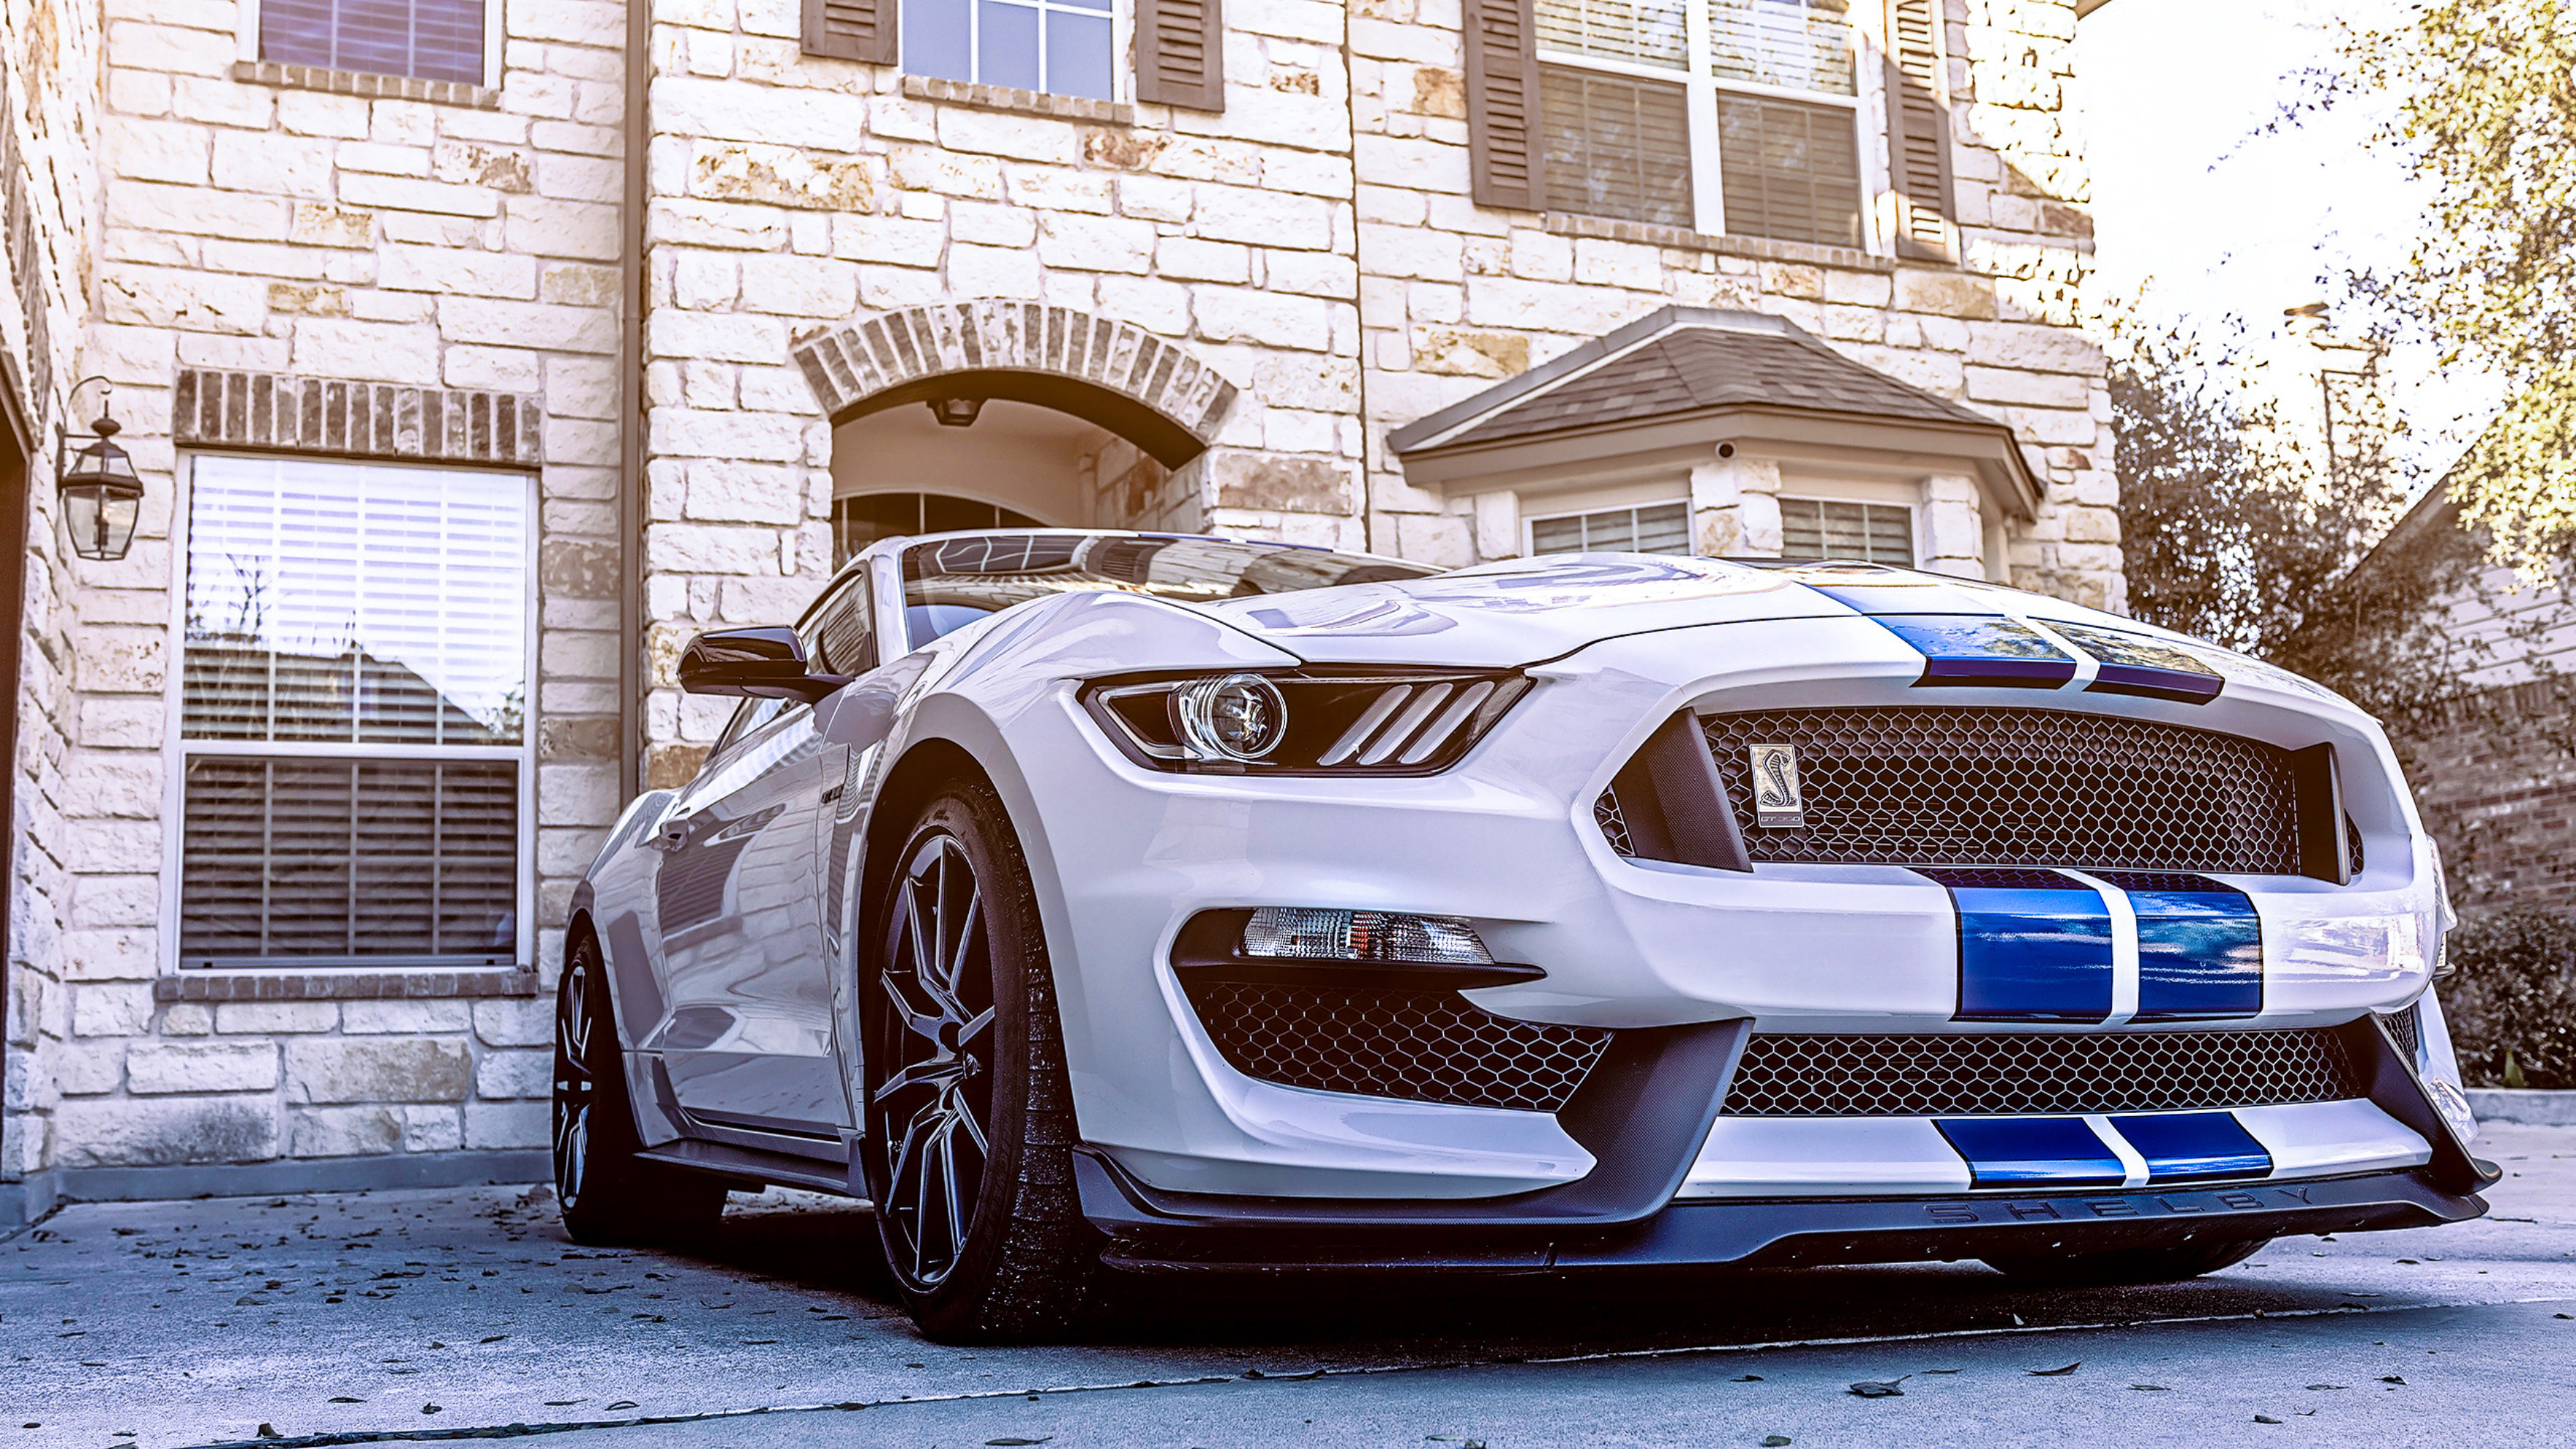 Ford Mustang Shelby Gt350 iPhone wallpapers